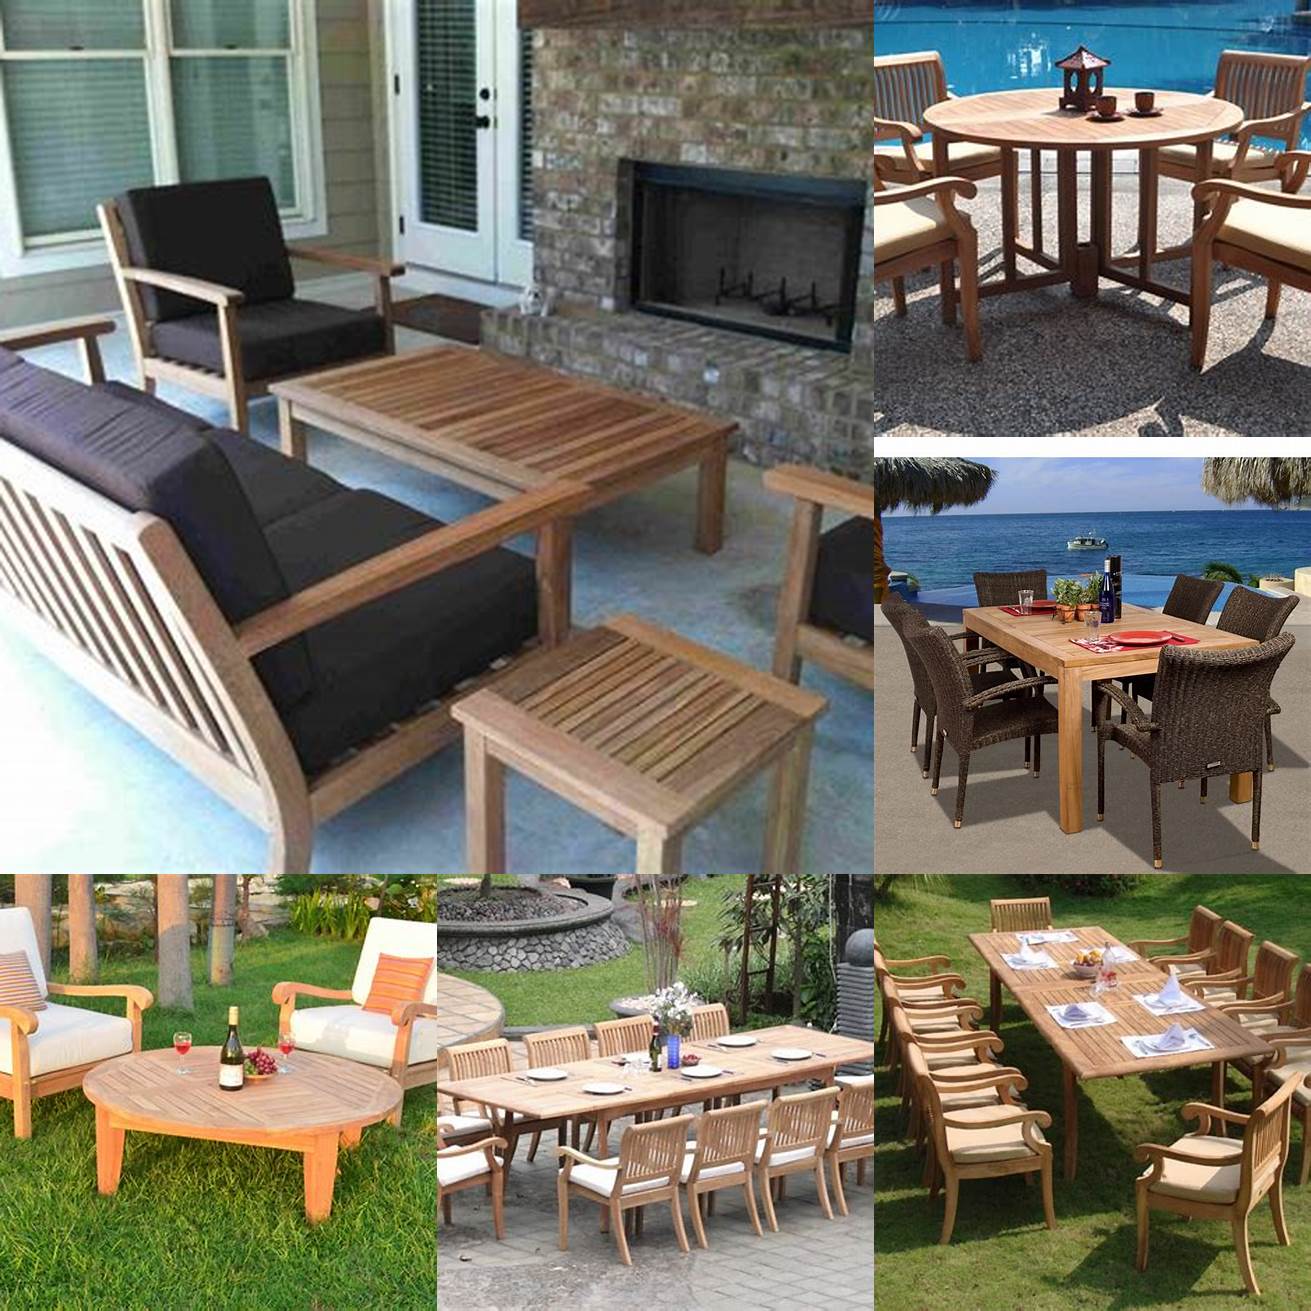 Selecting the Right Teak